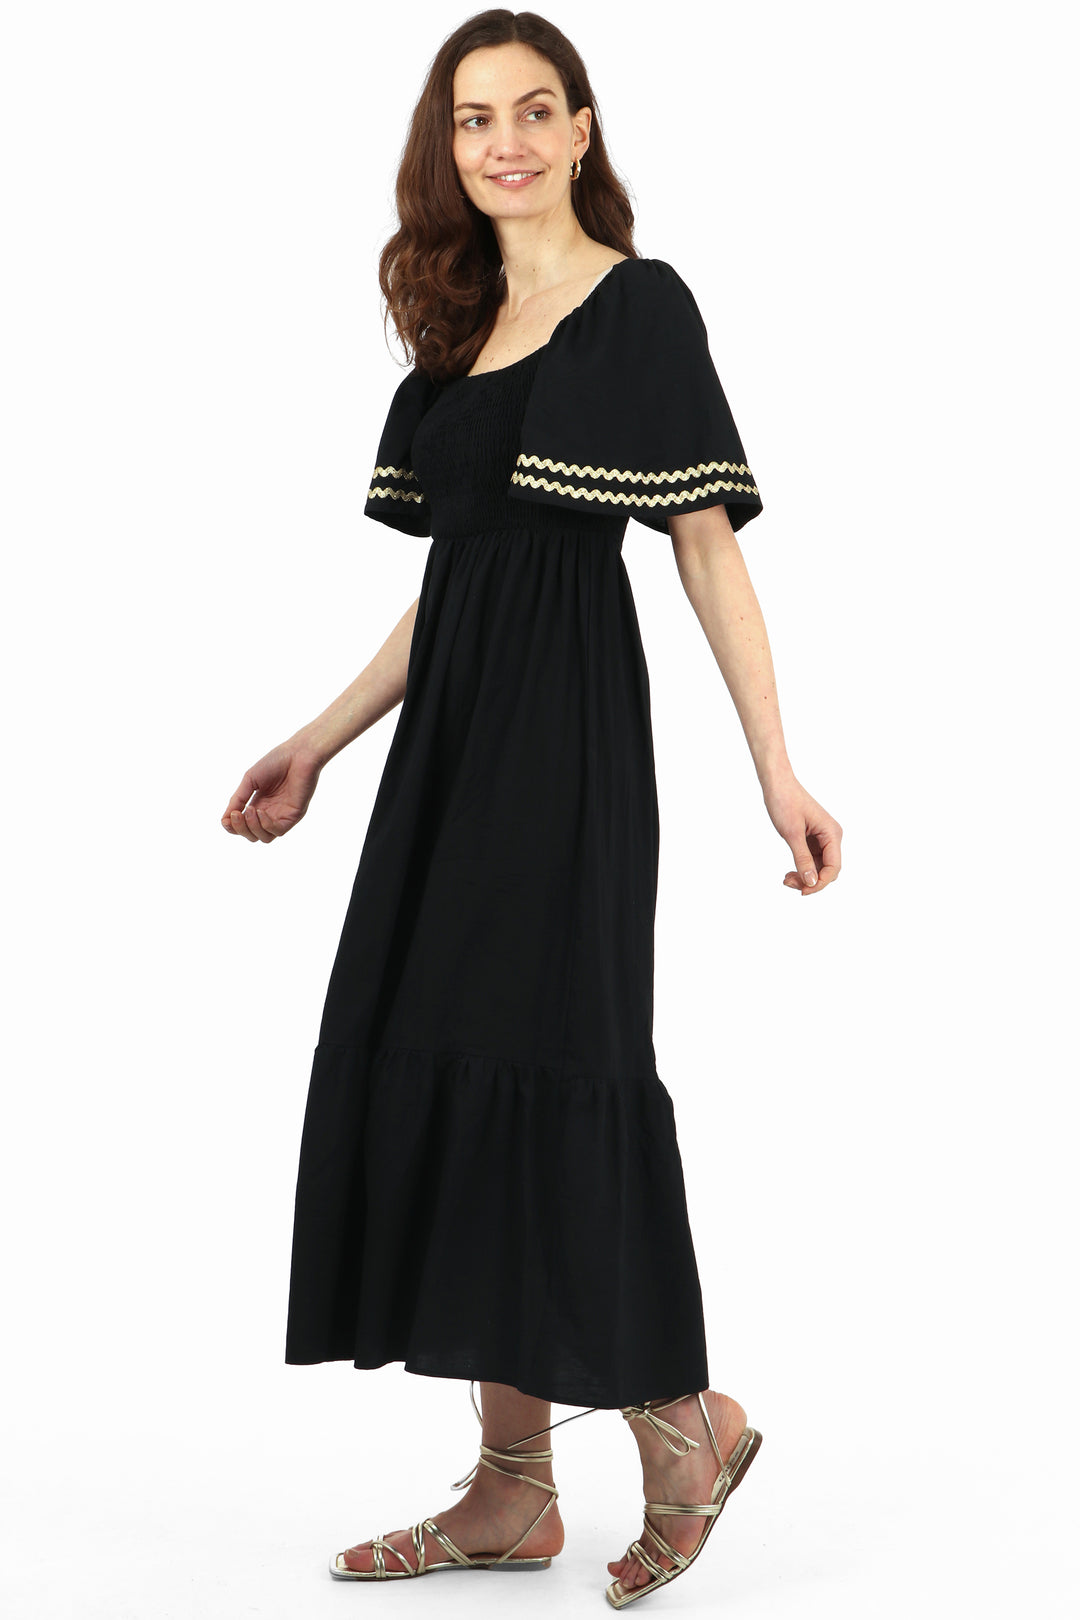 black maxi milkmaid dress with short bell sleeves and a shirred bodice